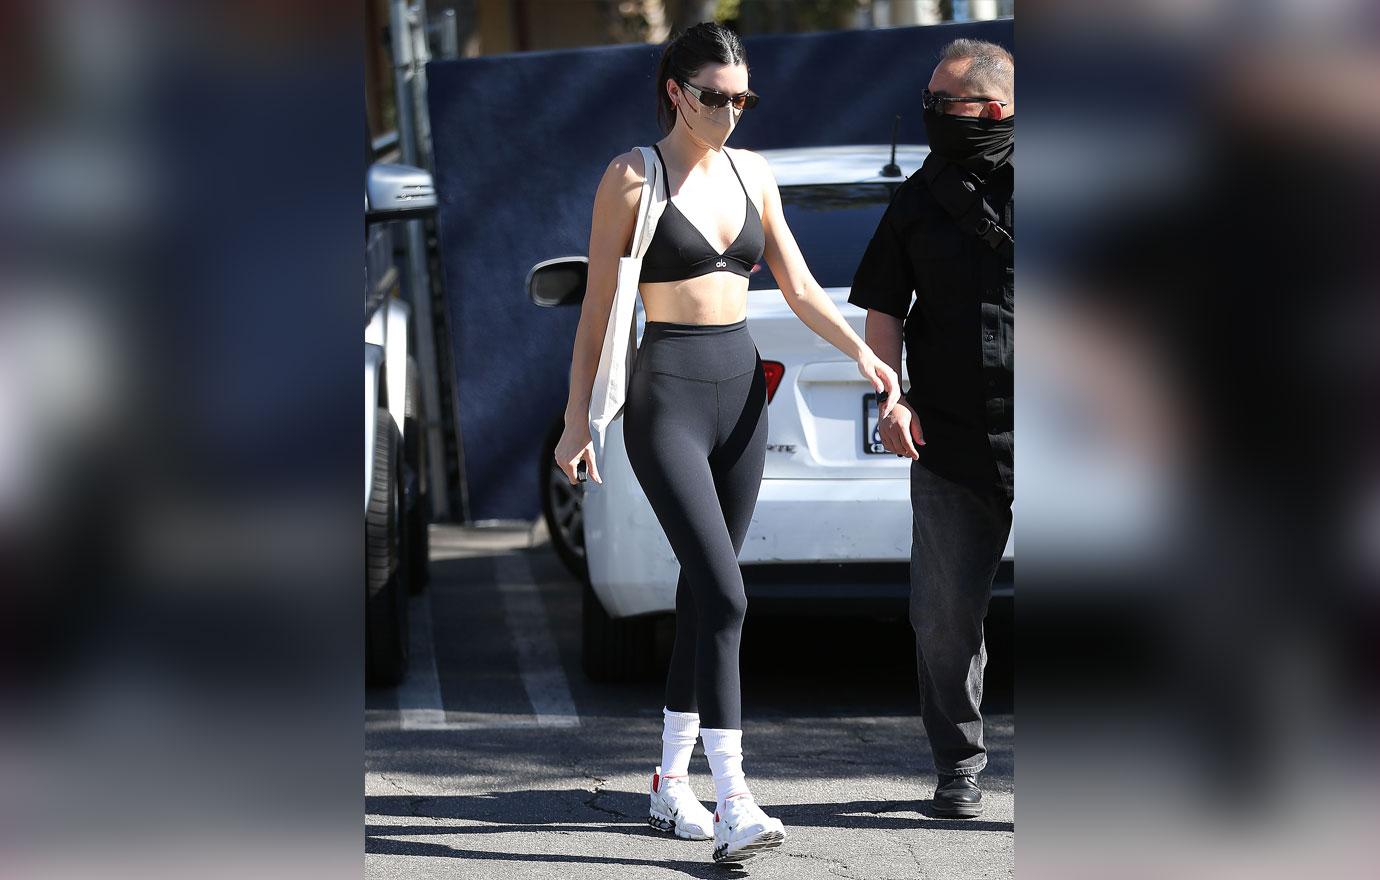 Kendall Jenner Wears Black Sports Bra & Leggings For A Workout: Photos